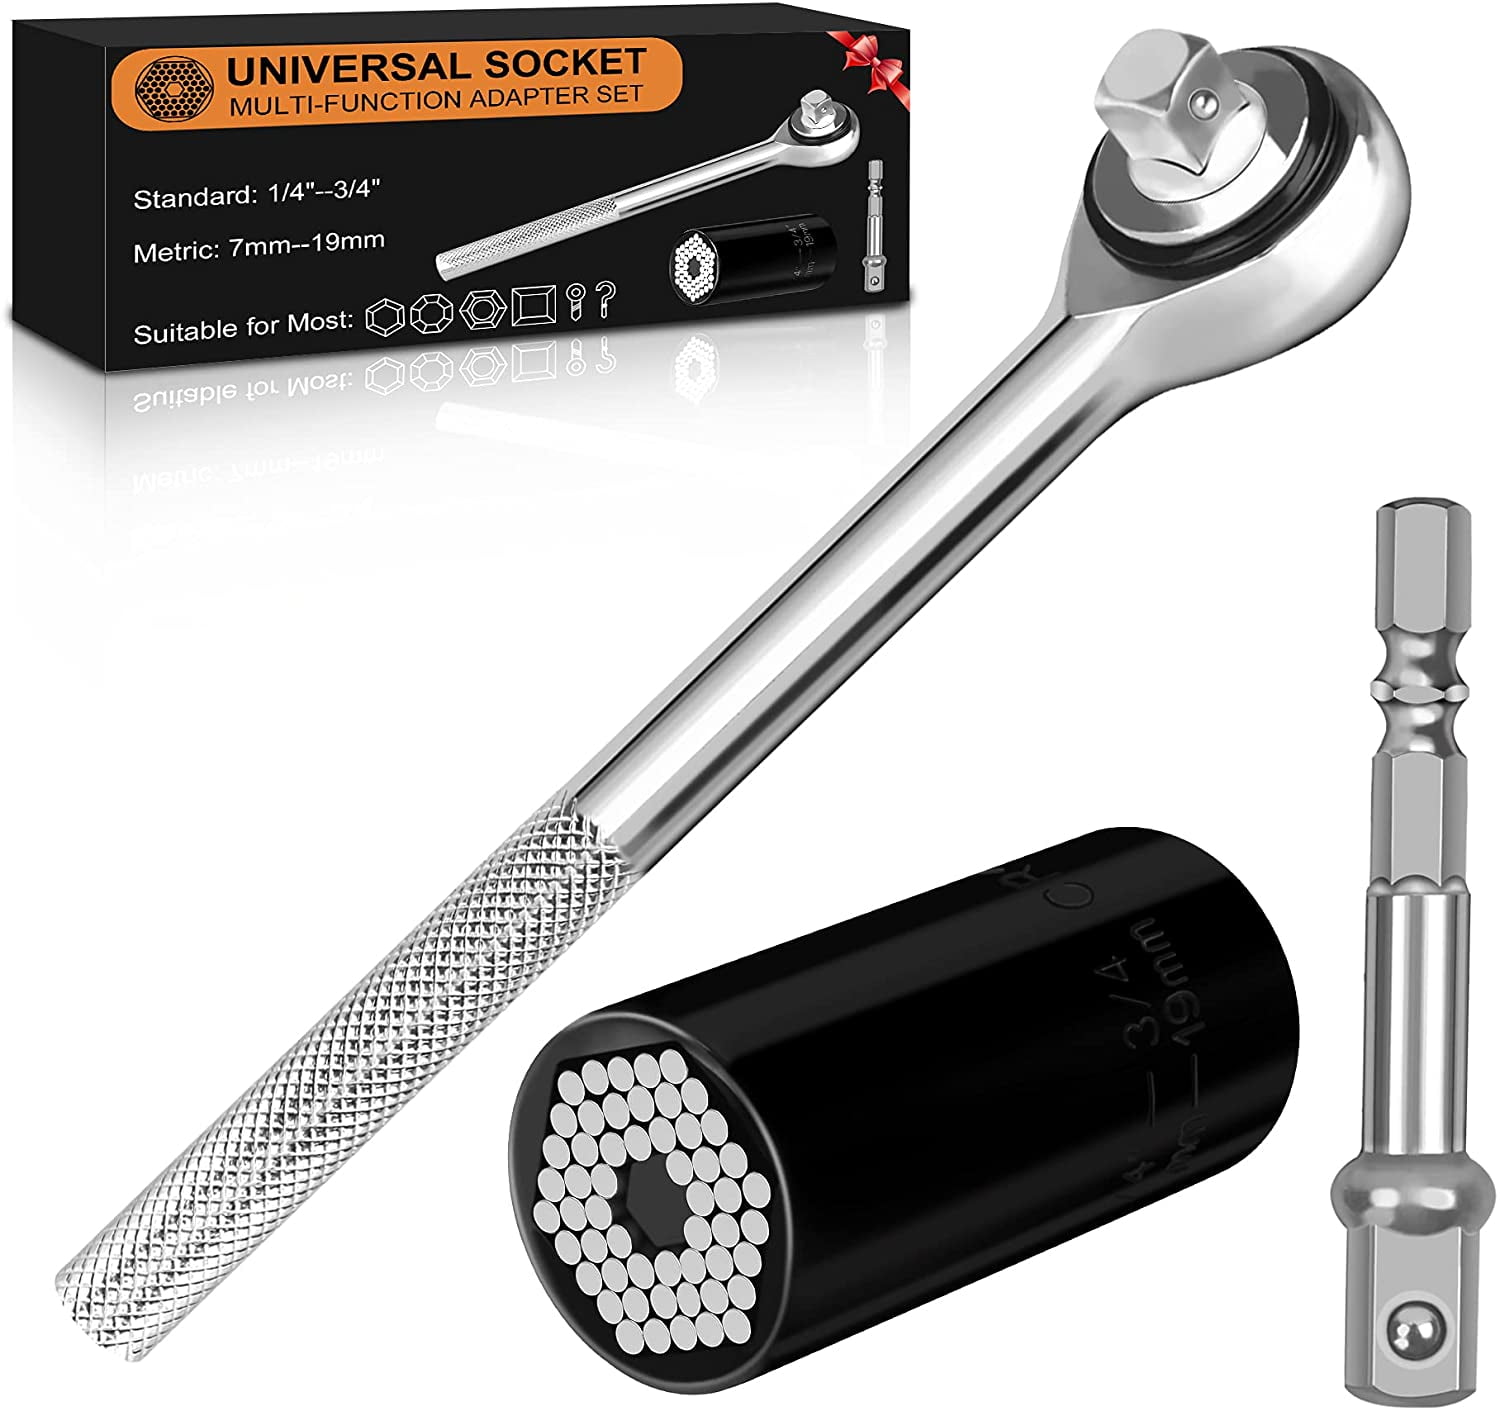 Multi-function Mighty Wrench 48 Tools In One Socket Torx Works with Spline Bolts Tiger 12-Point 6-Point Square Damaged Bolts and Any Size Standard or Metric 